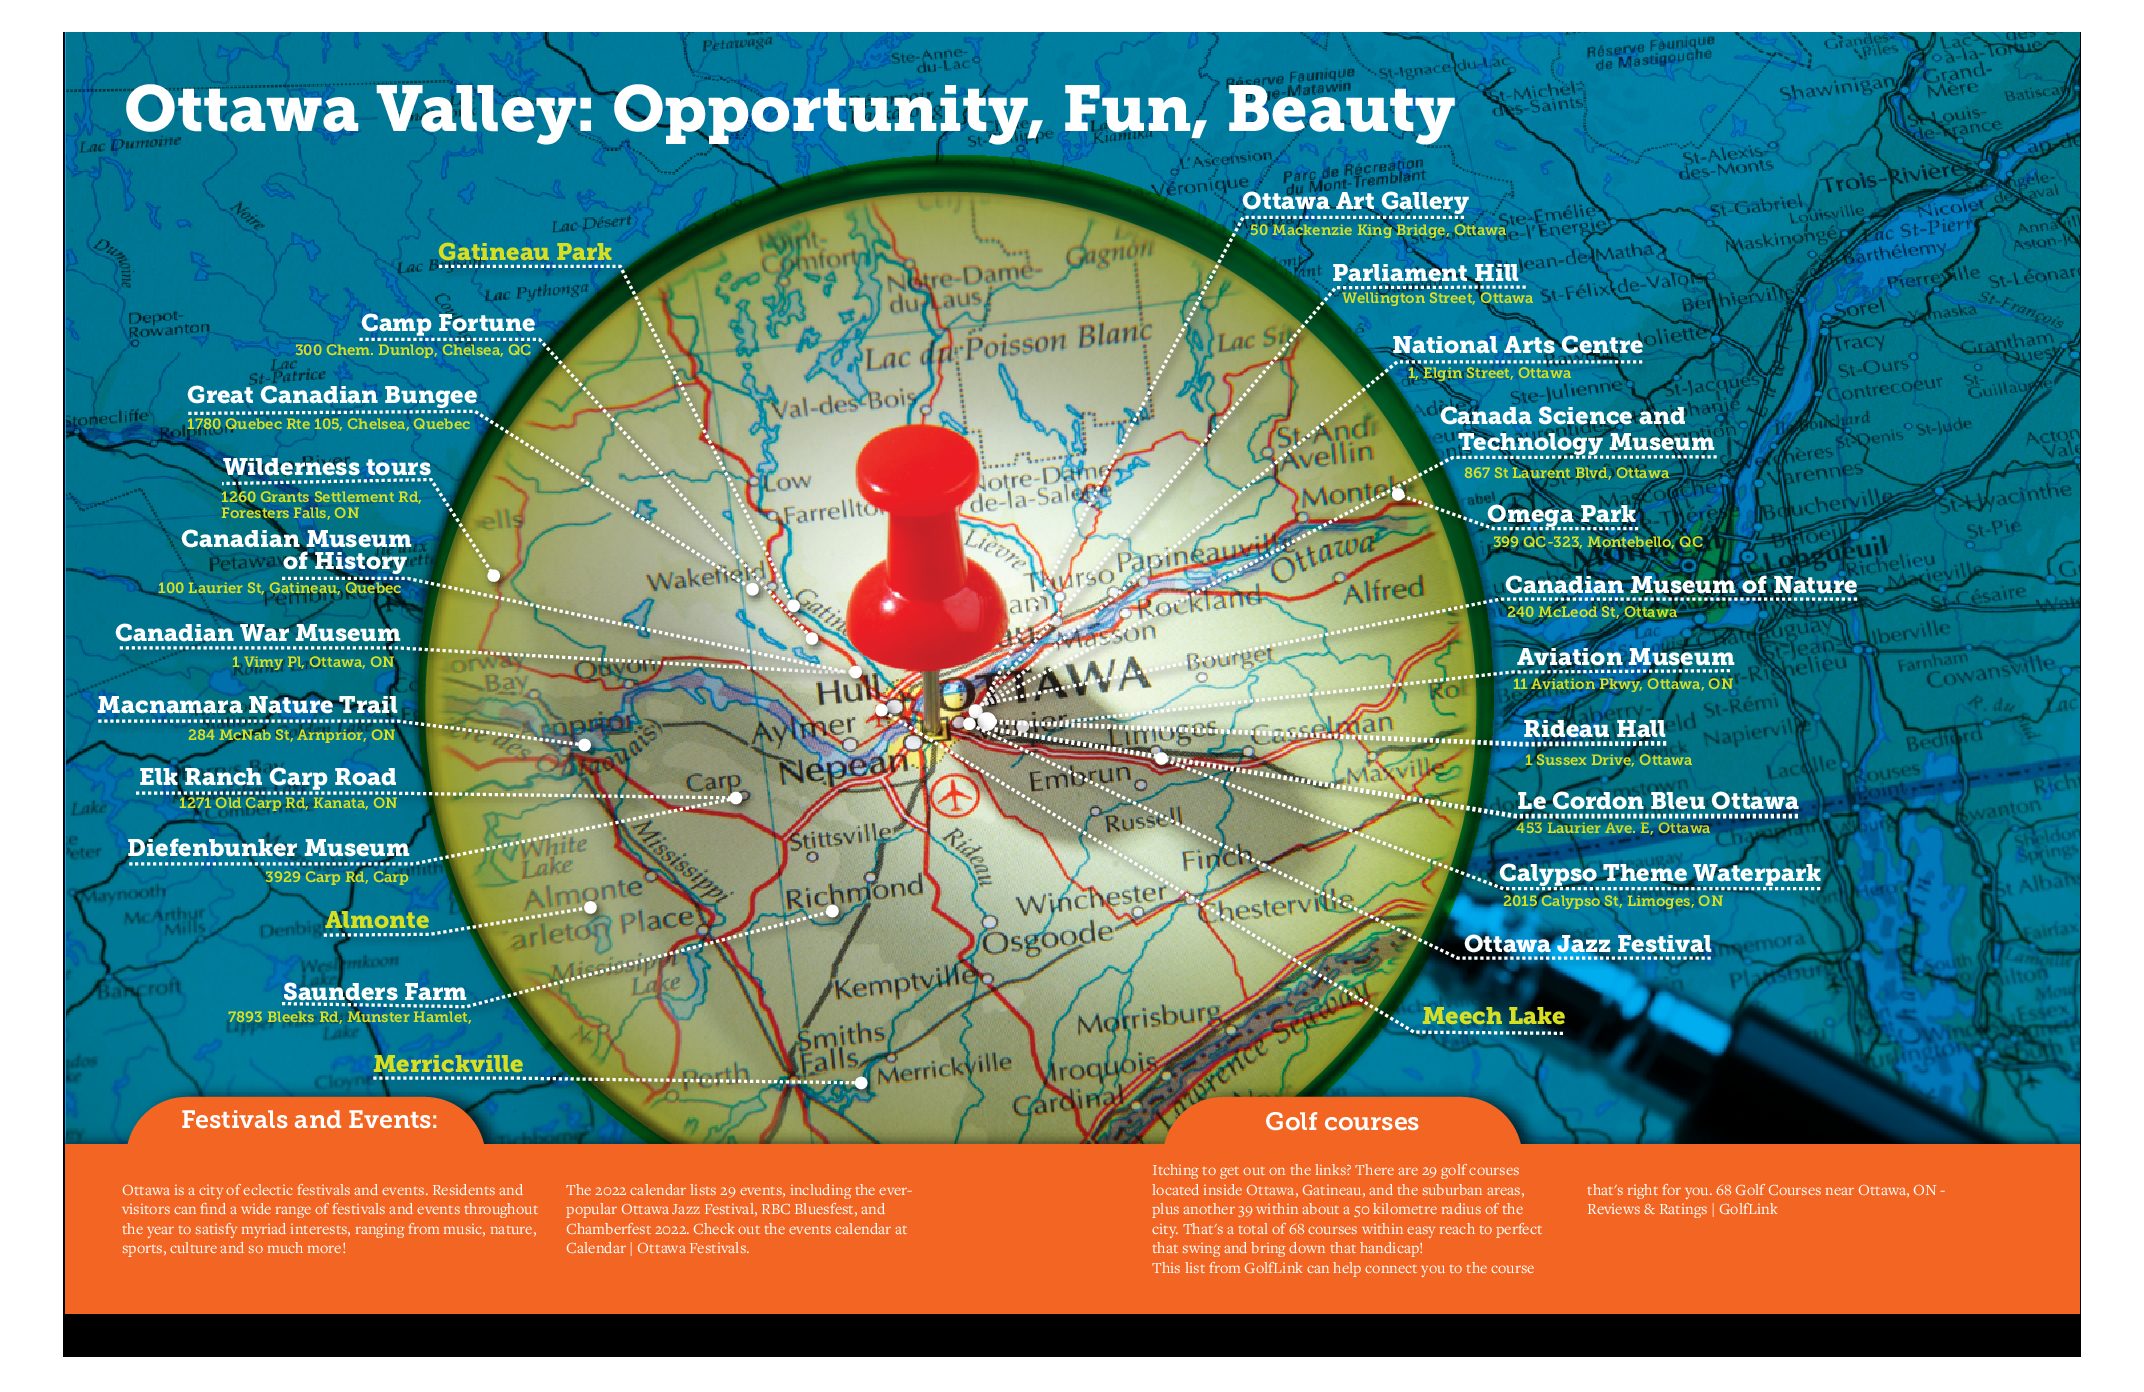 Ottawa Valley: Opportunity, Fun, Beauty! - INFOGRAPHIC